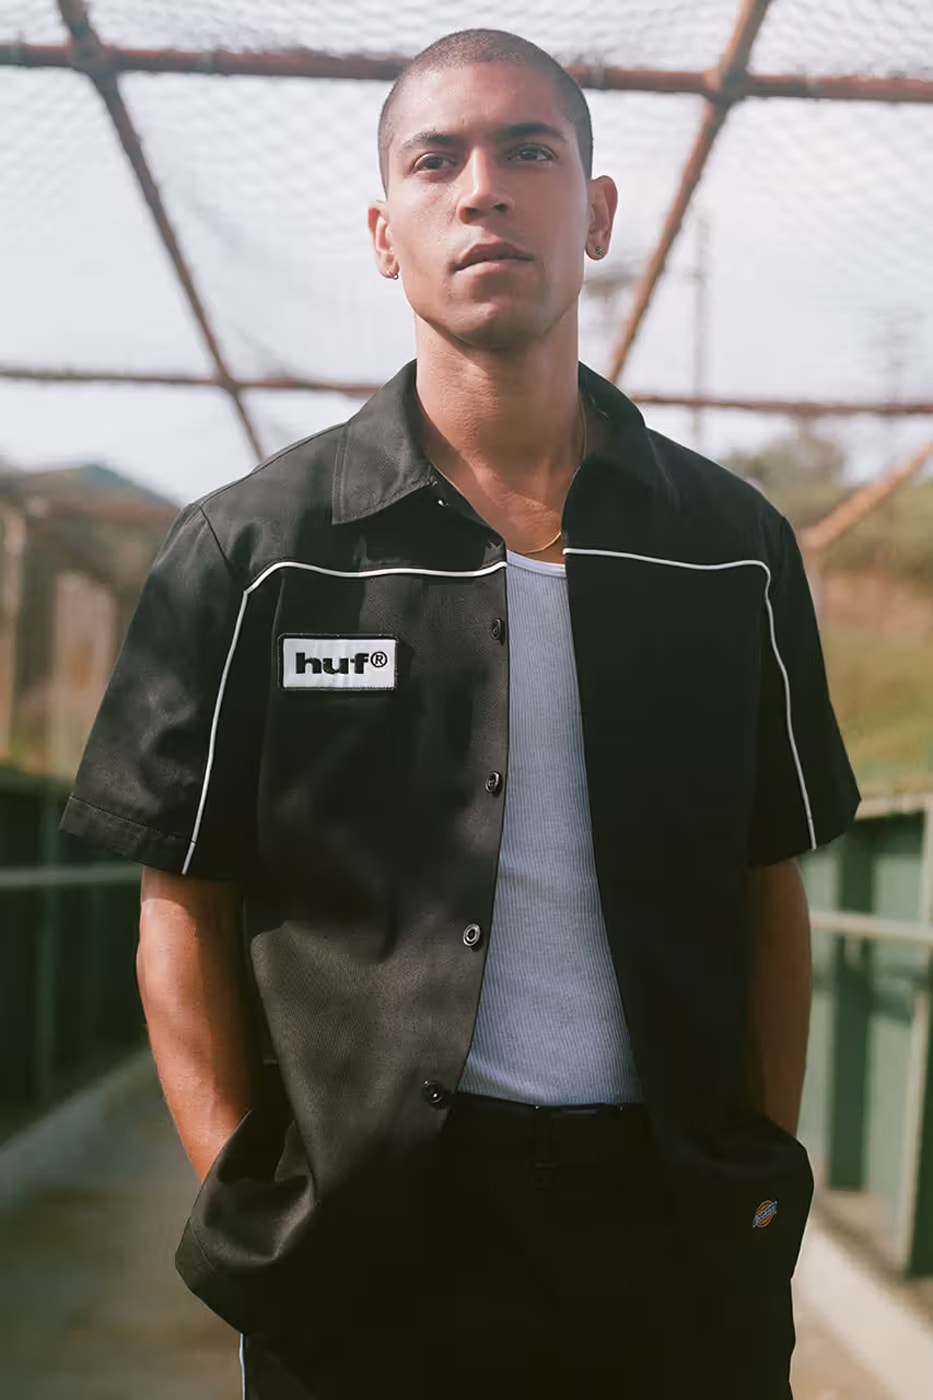 HUF Dickies collab keith hufnagel 90s eisenhower jacket track release info date price